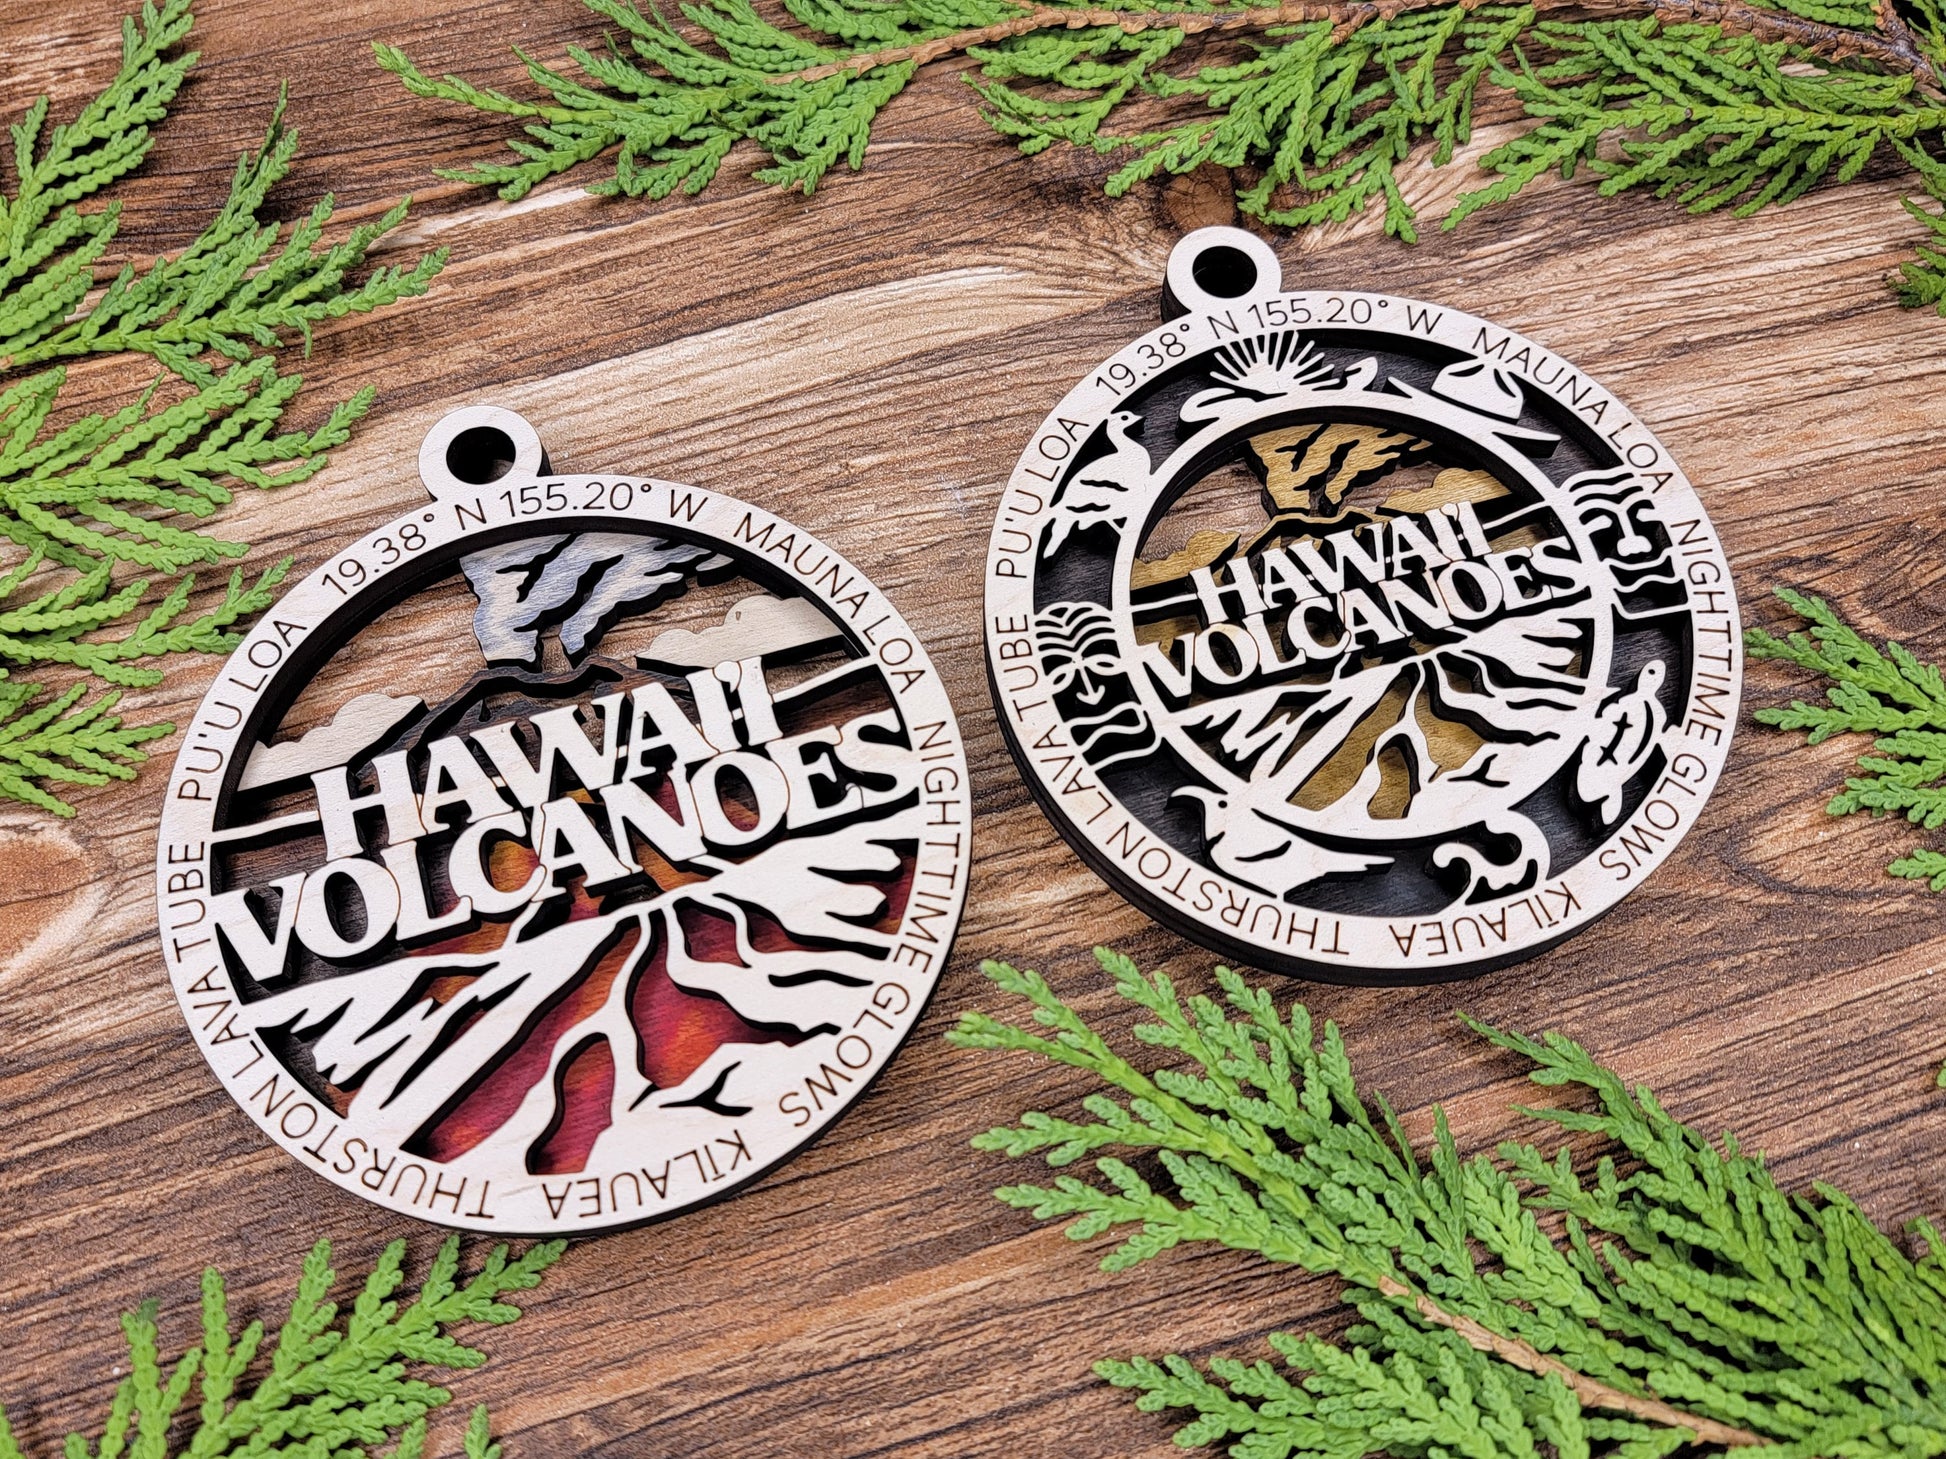 Hawaii Volcanoes Park Ornament - Includes 2 Ornaments - Laser Design SVG, PDF, AI File Download - Tested On Glowforge and LightBurn